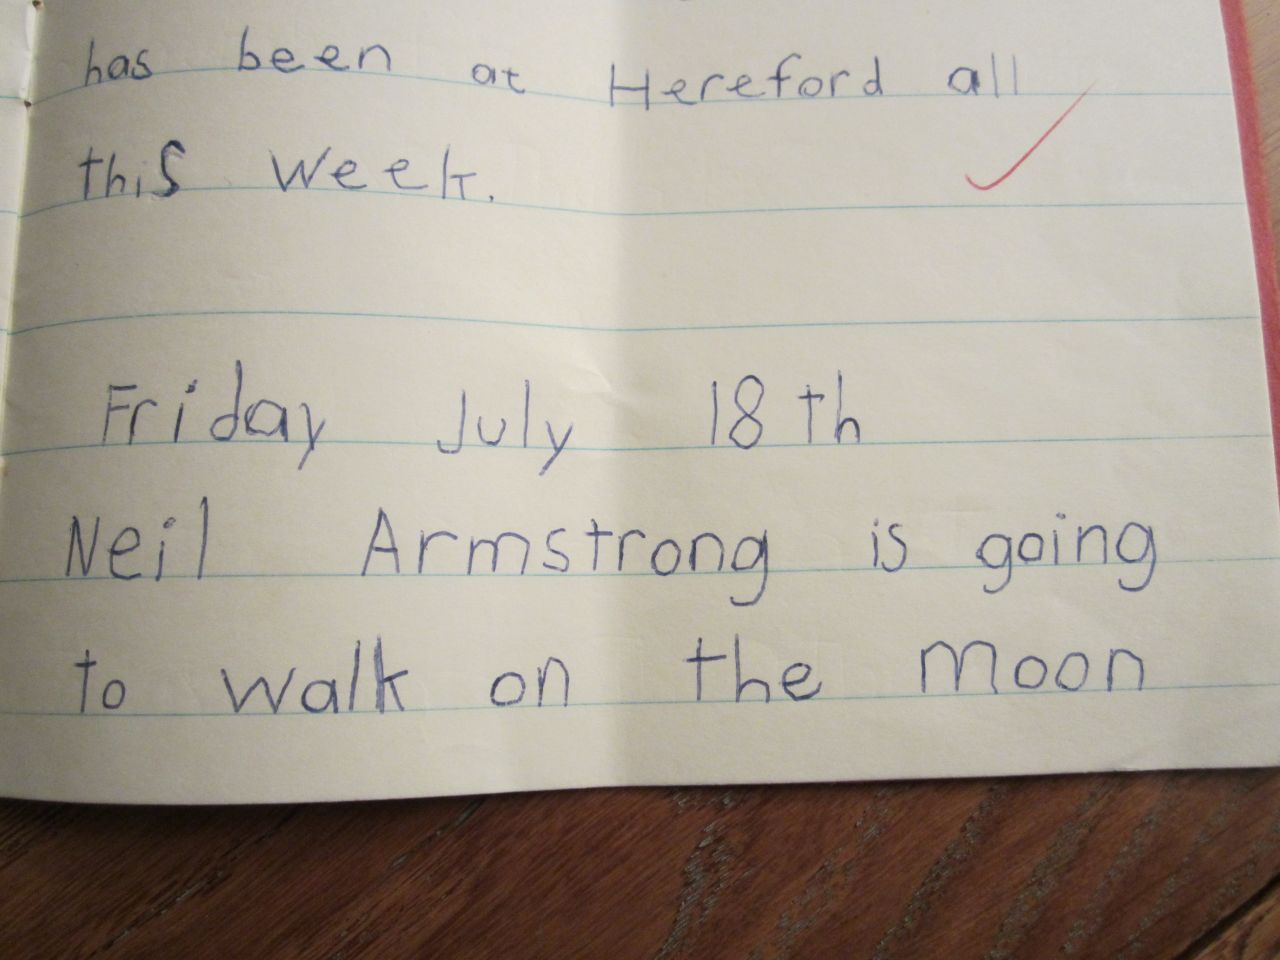 In 1969 schoolboys were excitedly looking forward to the Apollo moon landing.